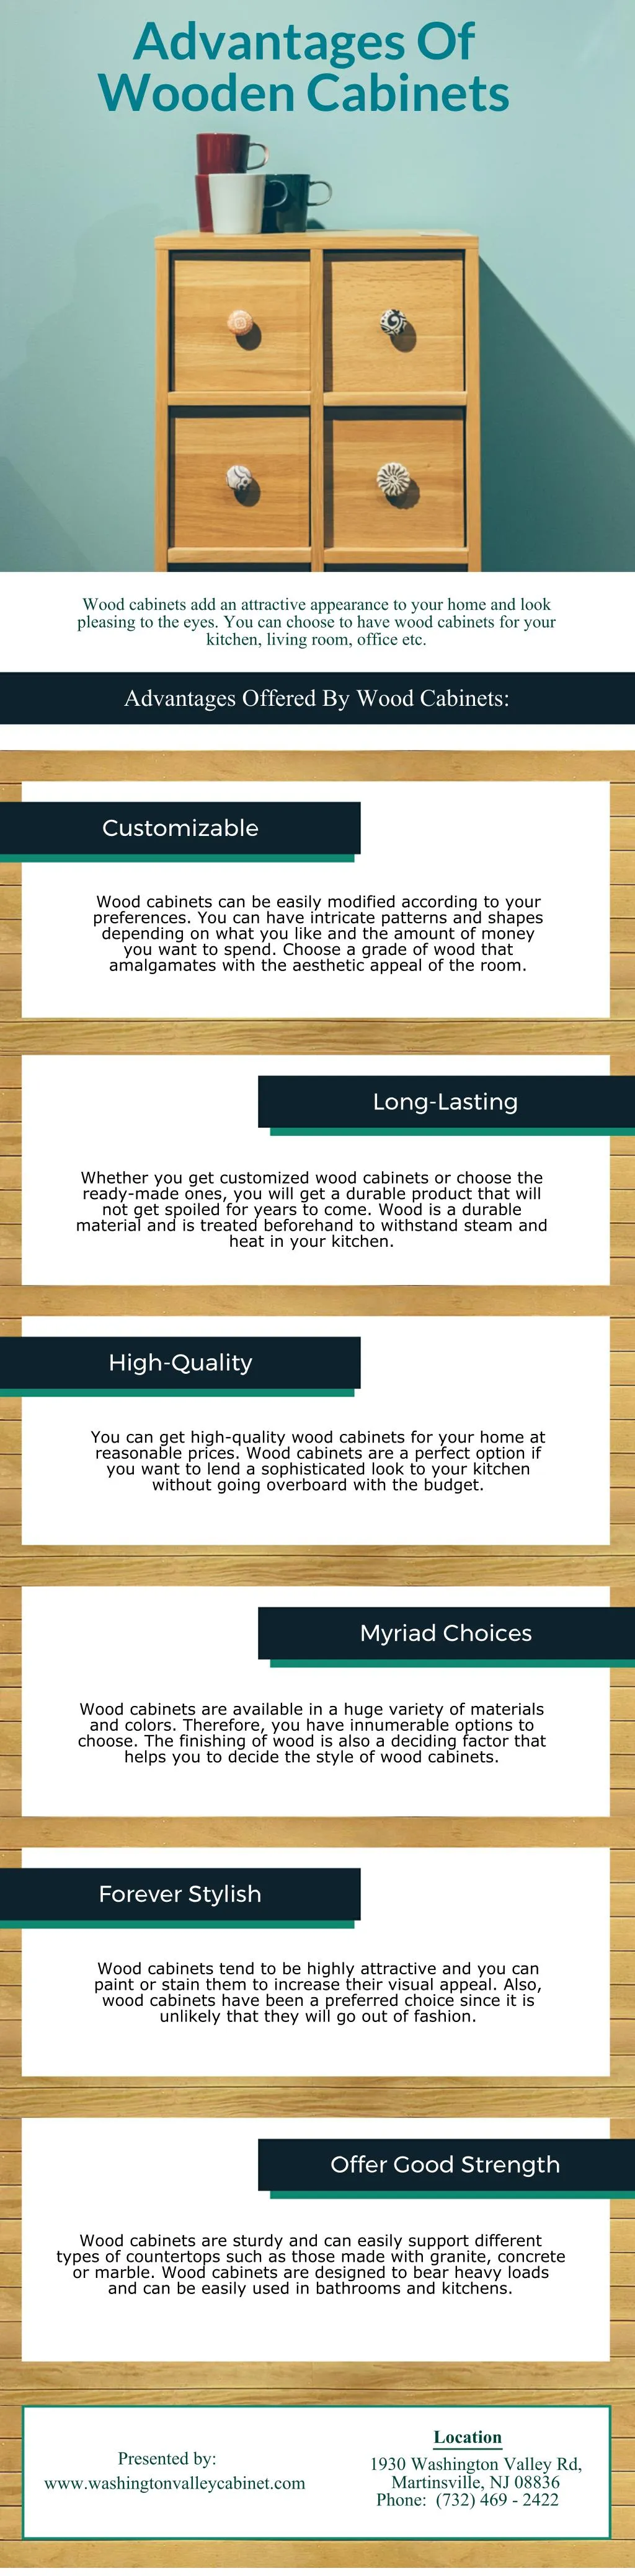 advantages of wooden cabinets